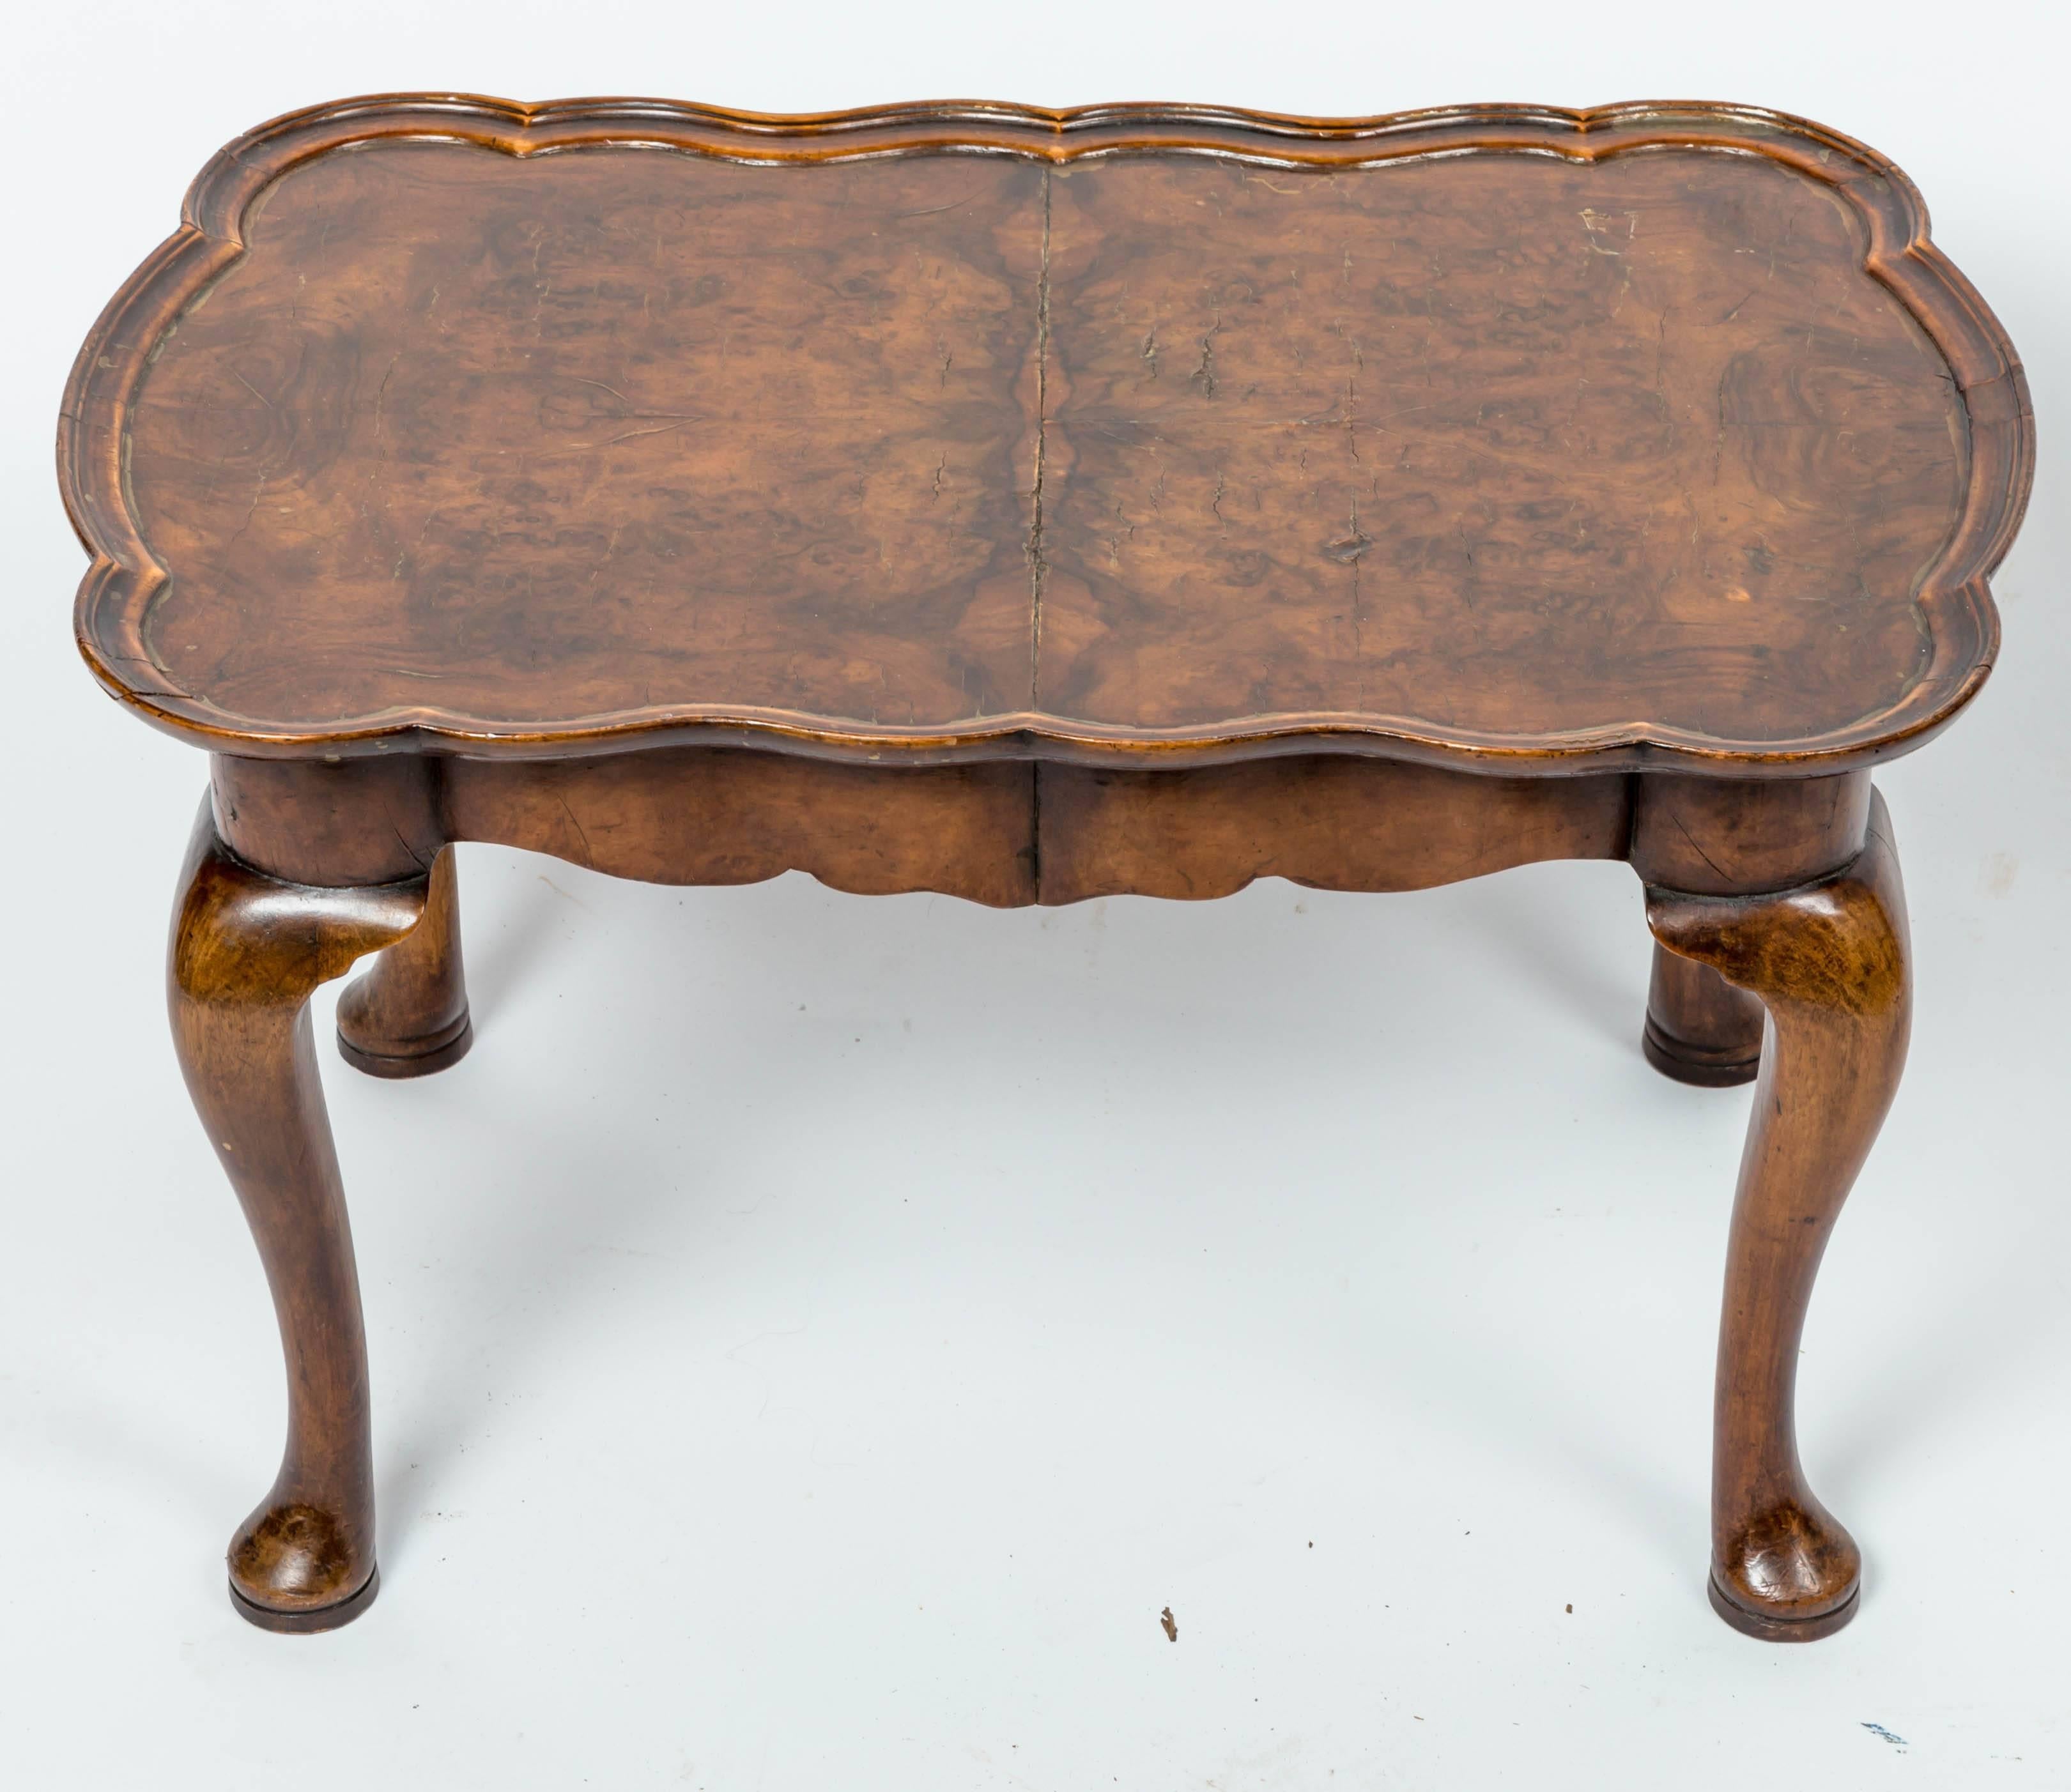 Burl Veneer Chippendale English side table of an unusual small scale.